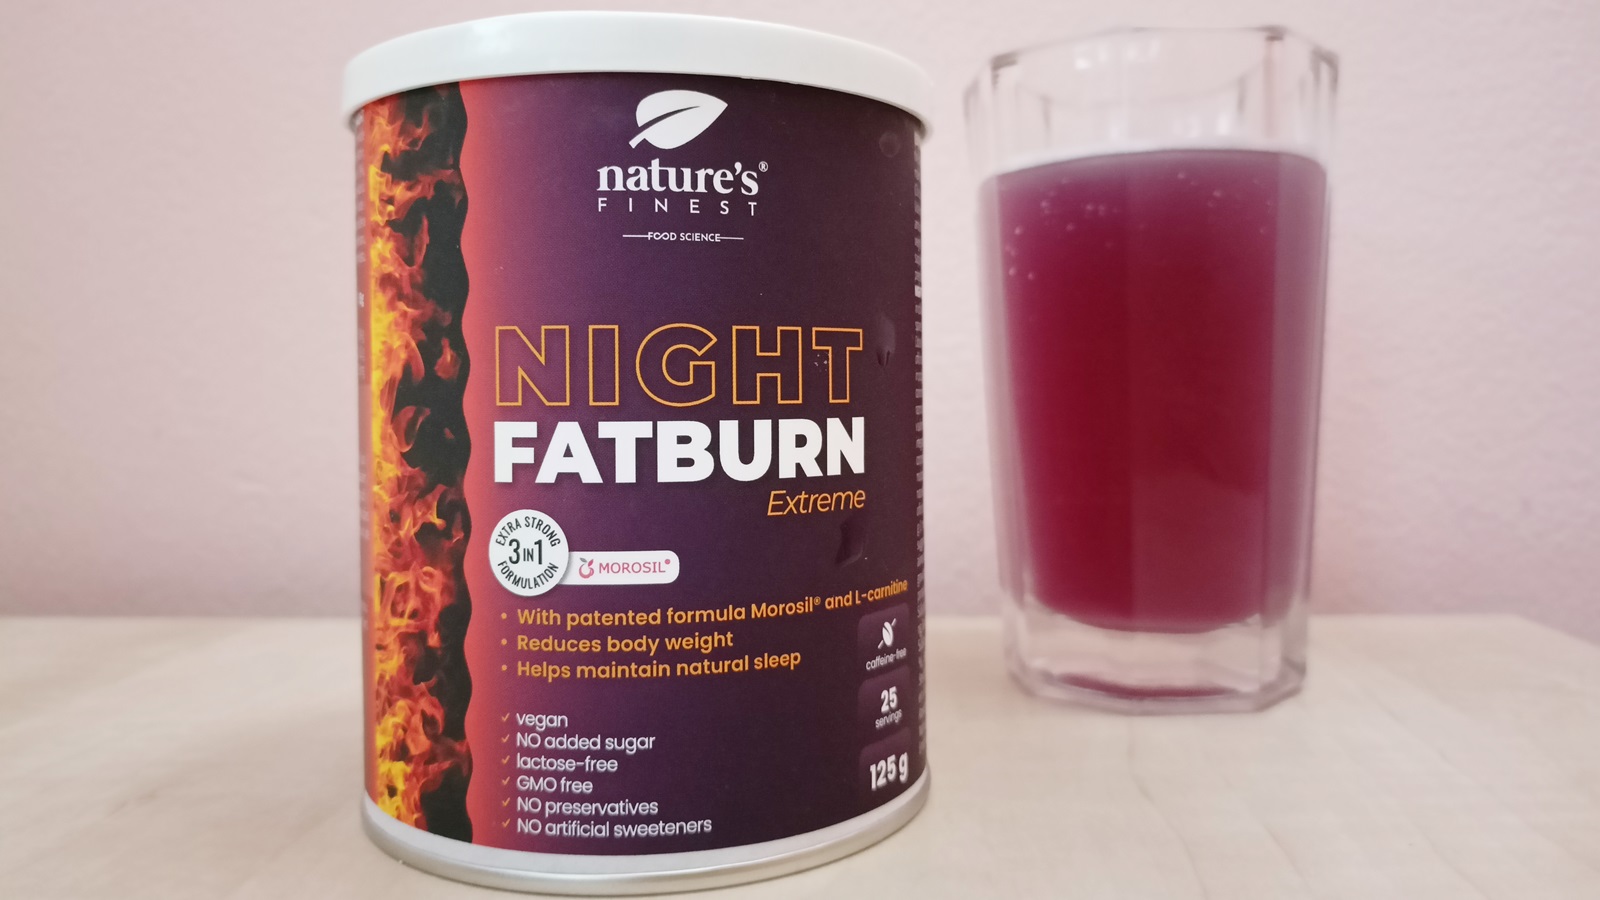 Review of Night FatBurn Extreme by Nature’s Finest